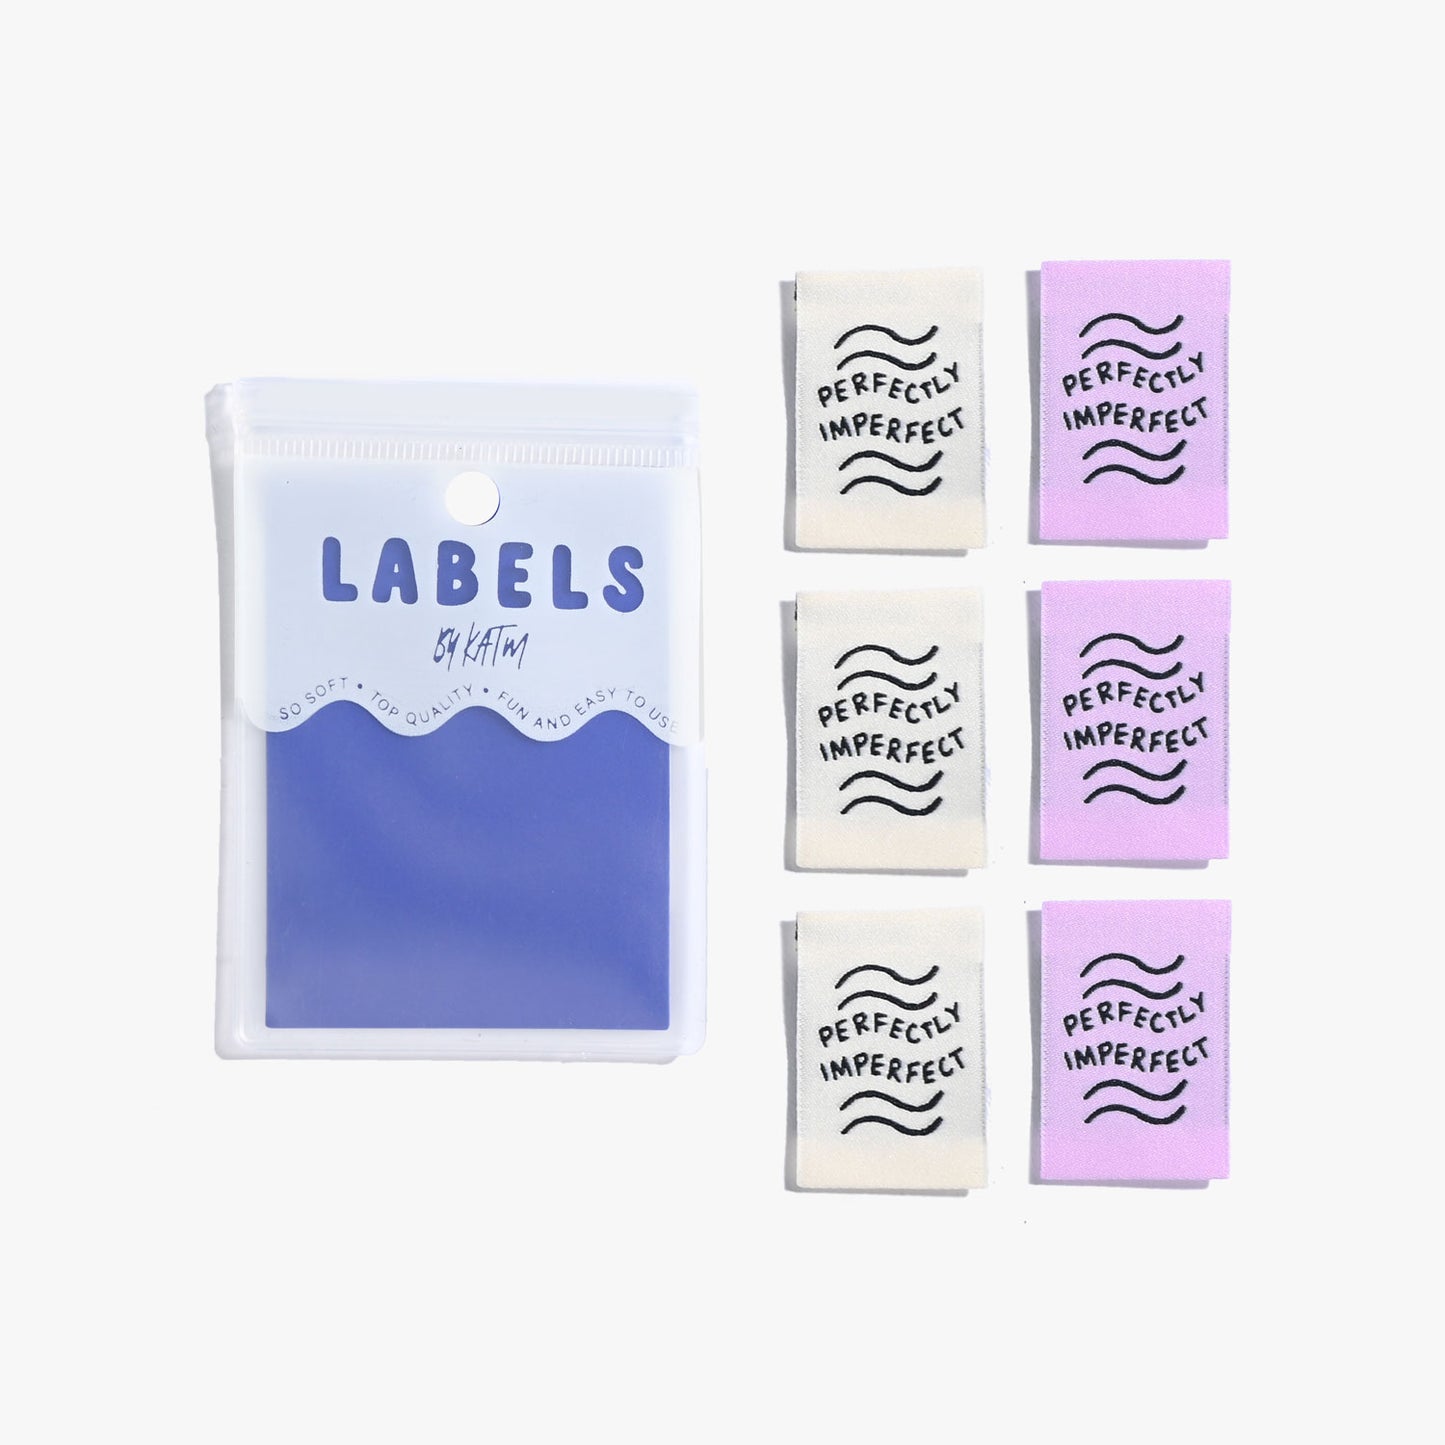 Perfectly Imperfect - Woven Labels look